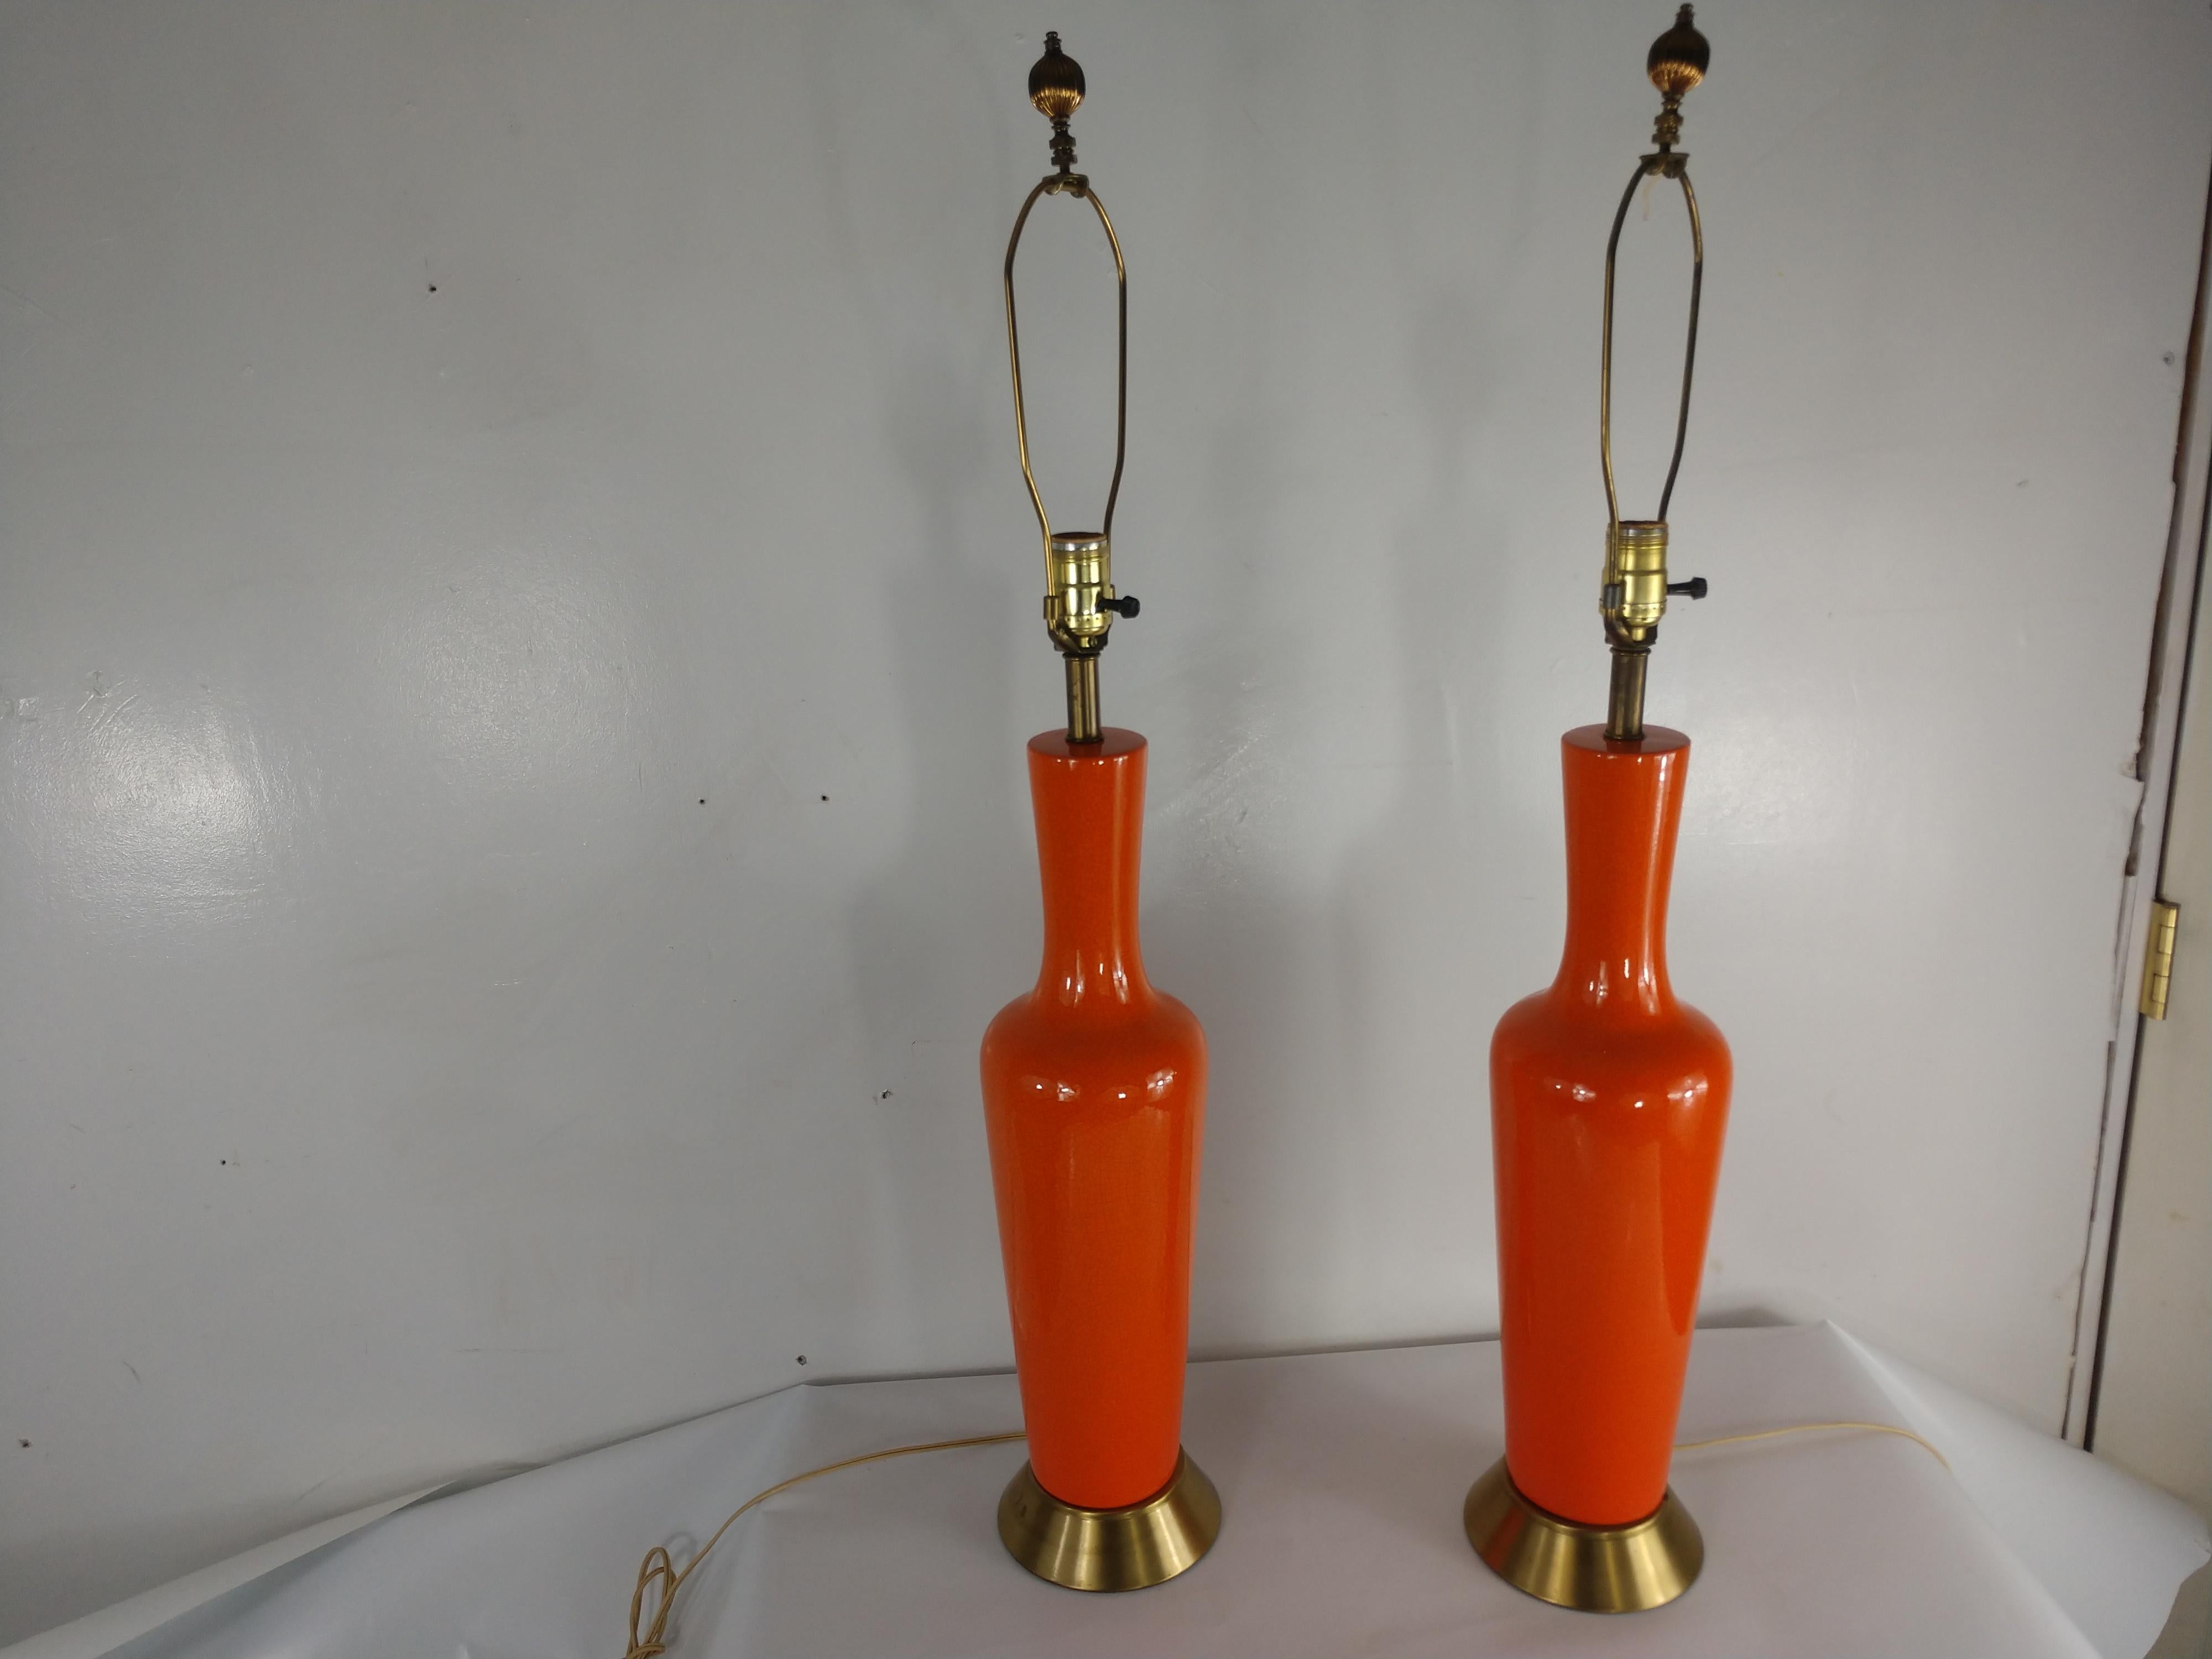 Brass Pair of Mid-Century Modern Table Lamps with Orange Crackle Glaze, C1958 For Sale